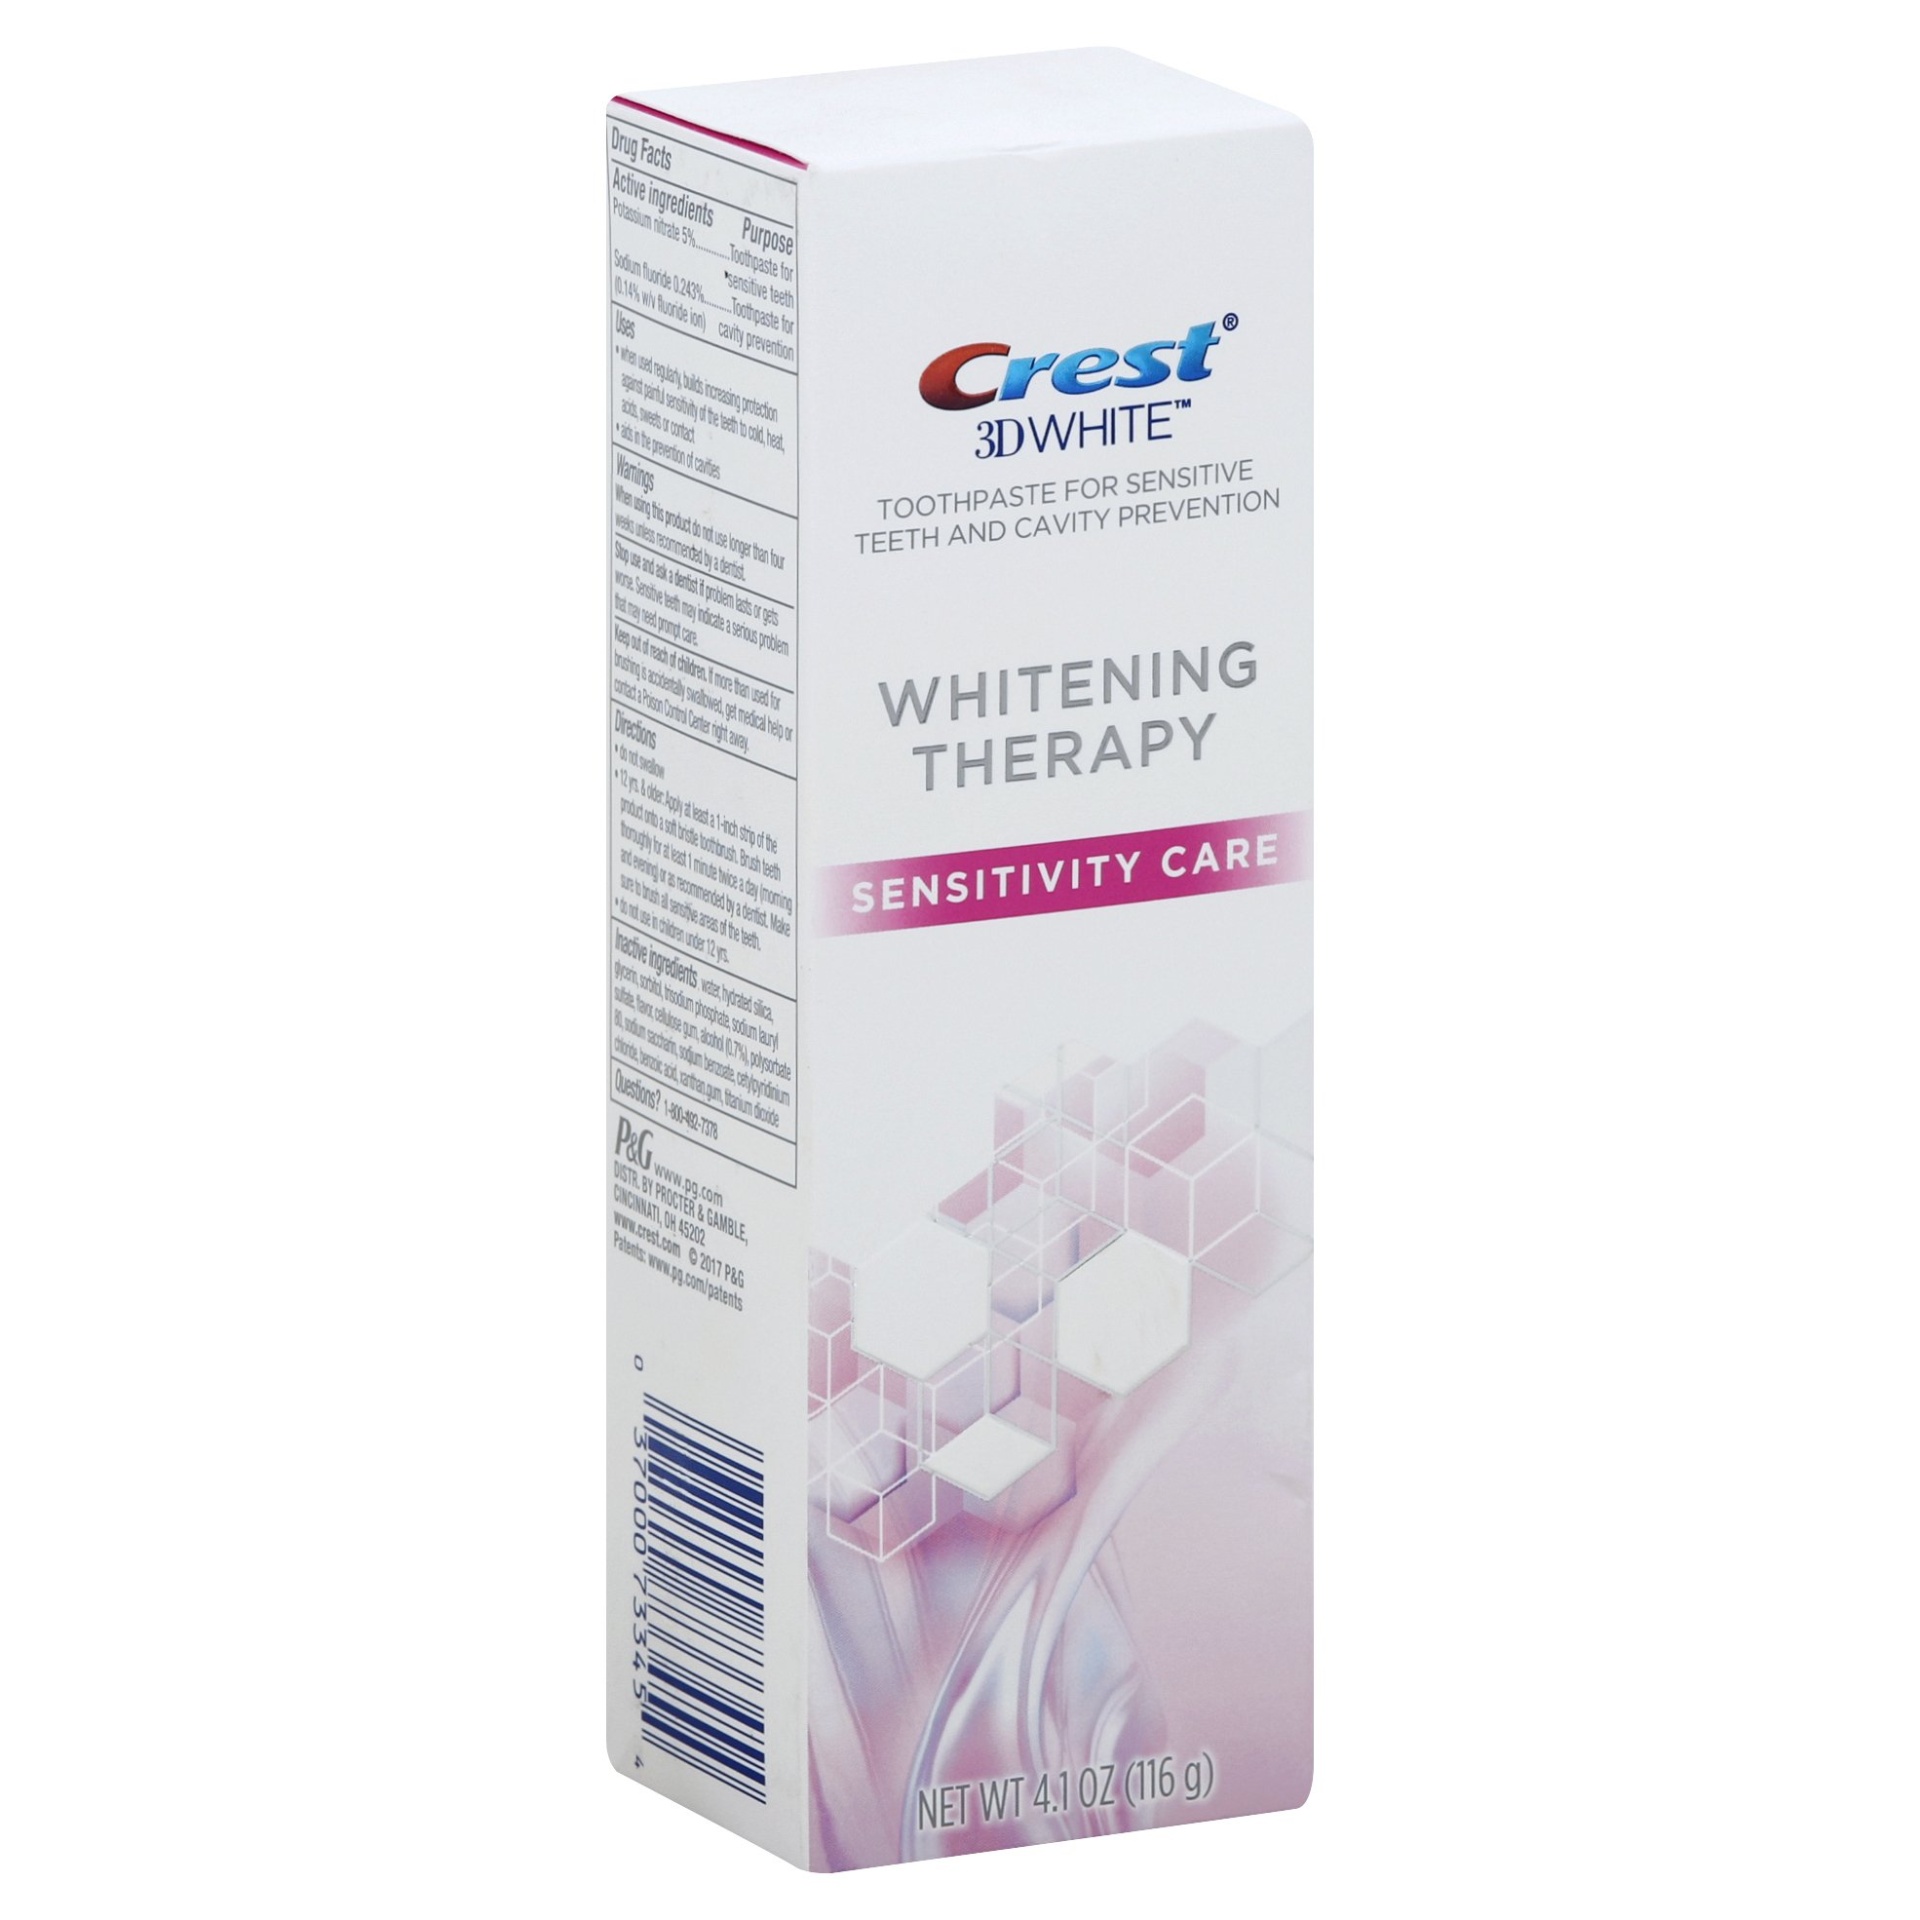 slide 1 of 5, Crest 3D White Whitening Therapy Sensitivity Care Toothpaste, 4.1 oz